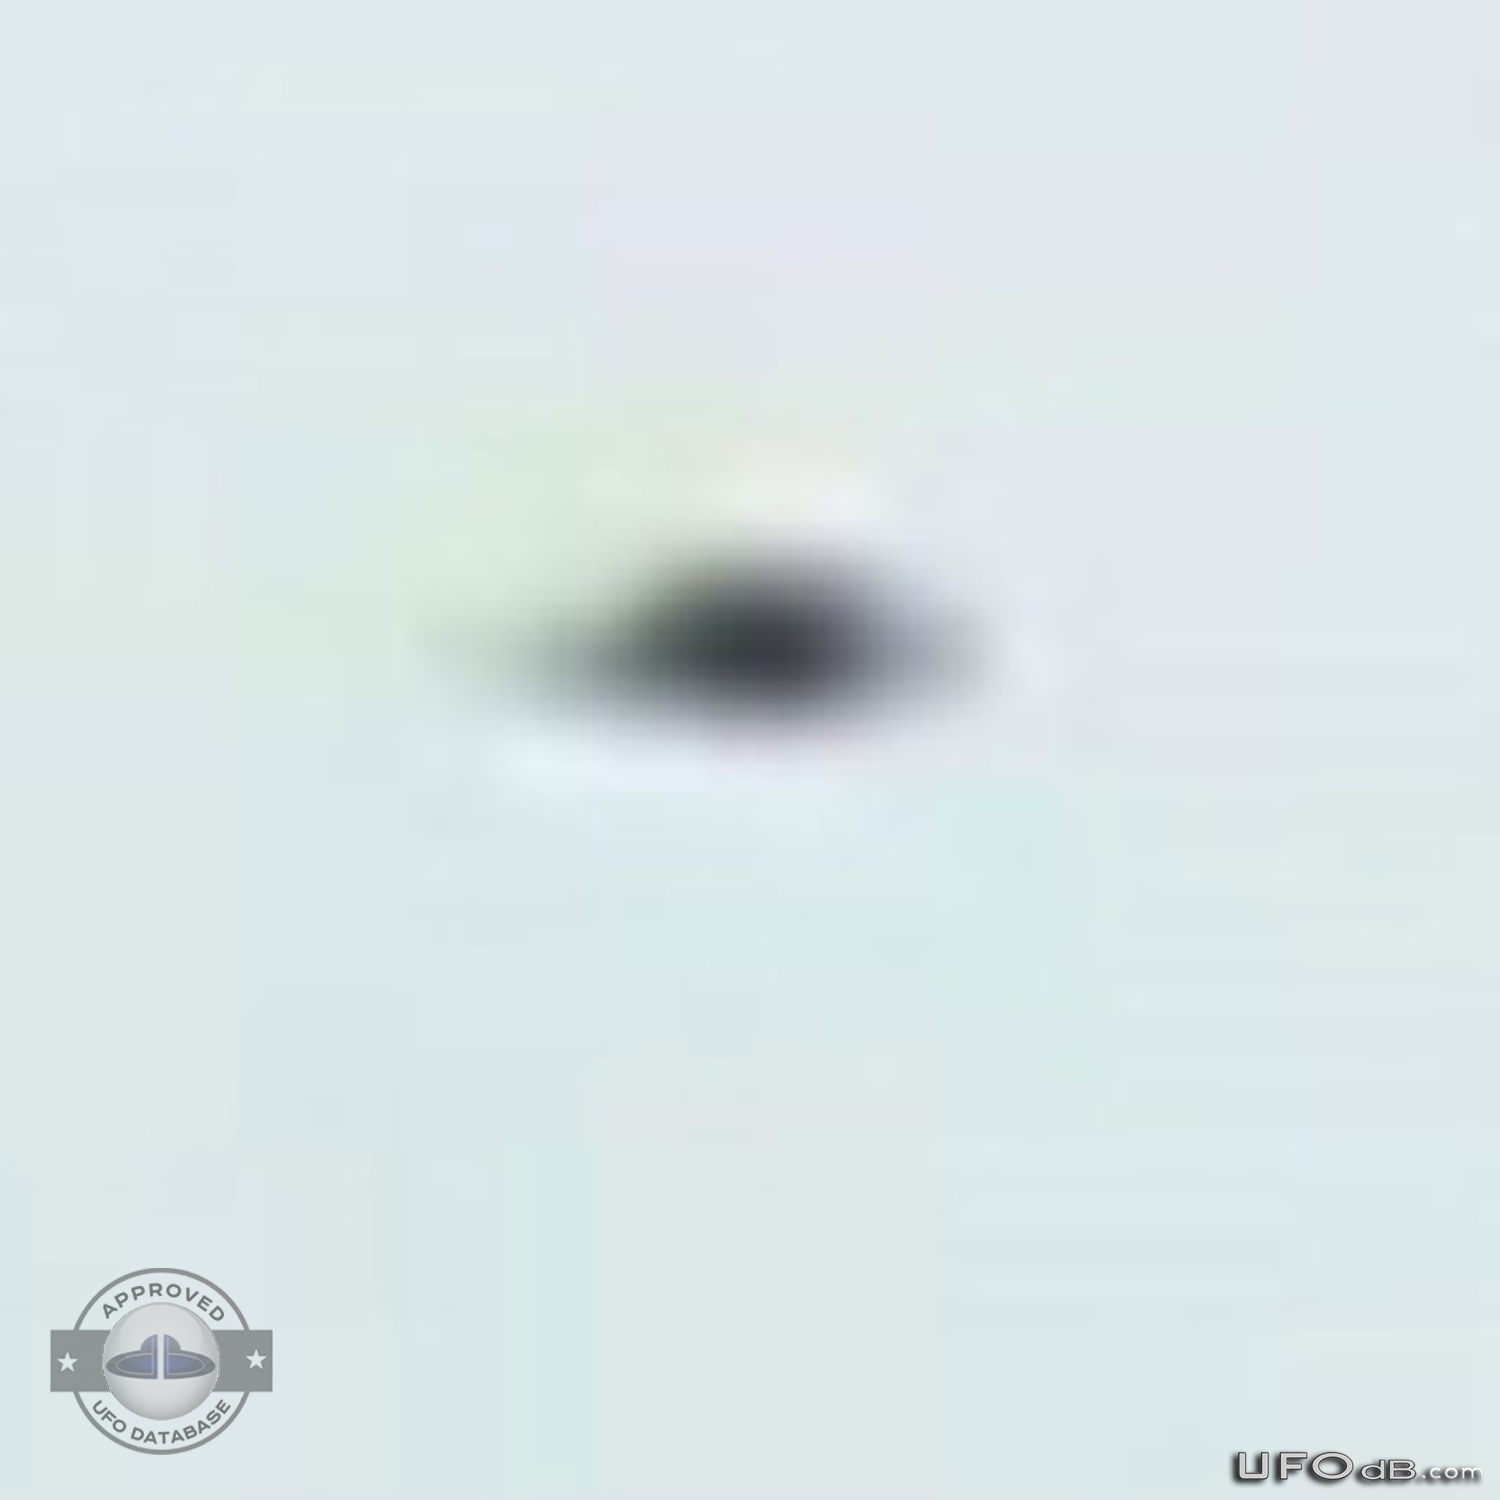 UFO caught on picture near the Resort World Sentosa in Singapore 2010 UFO Picture #393-6